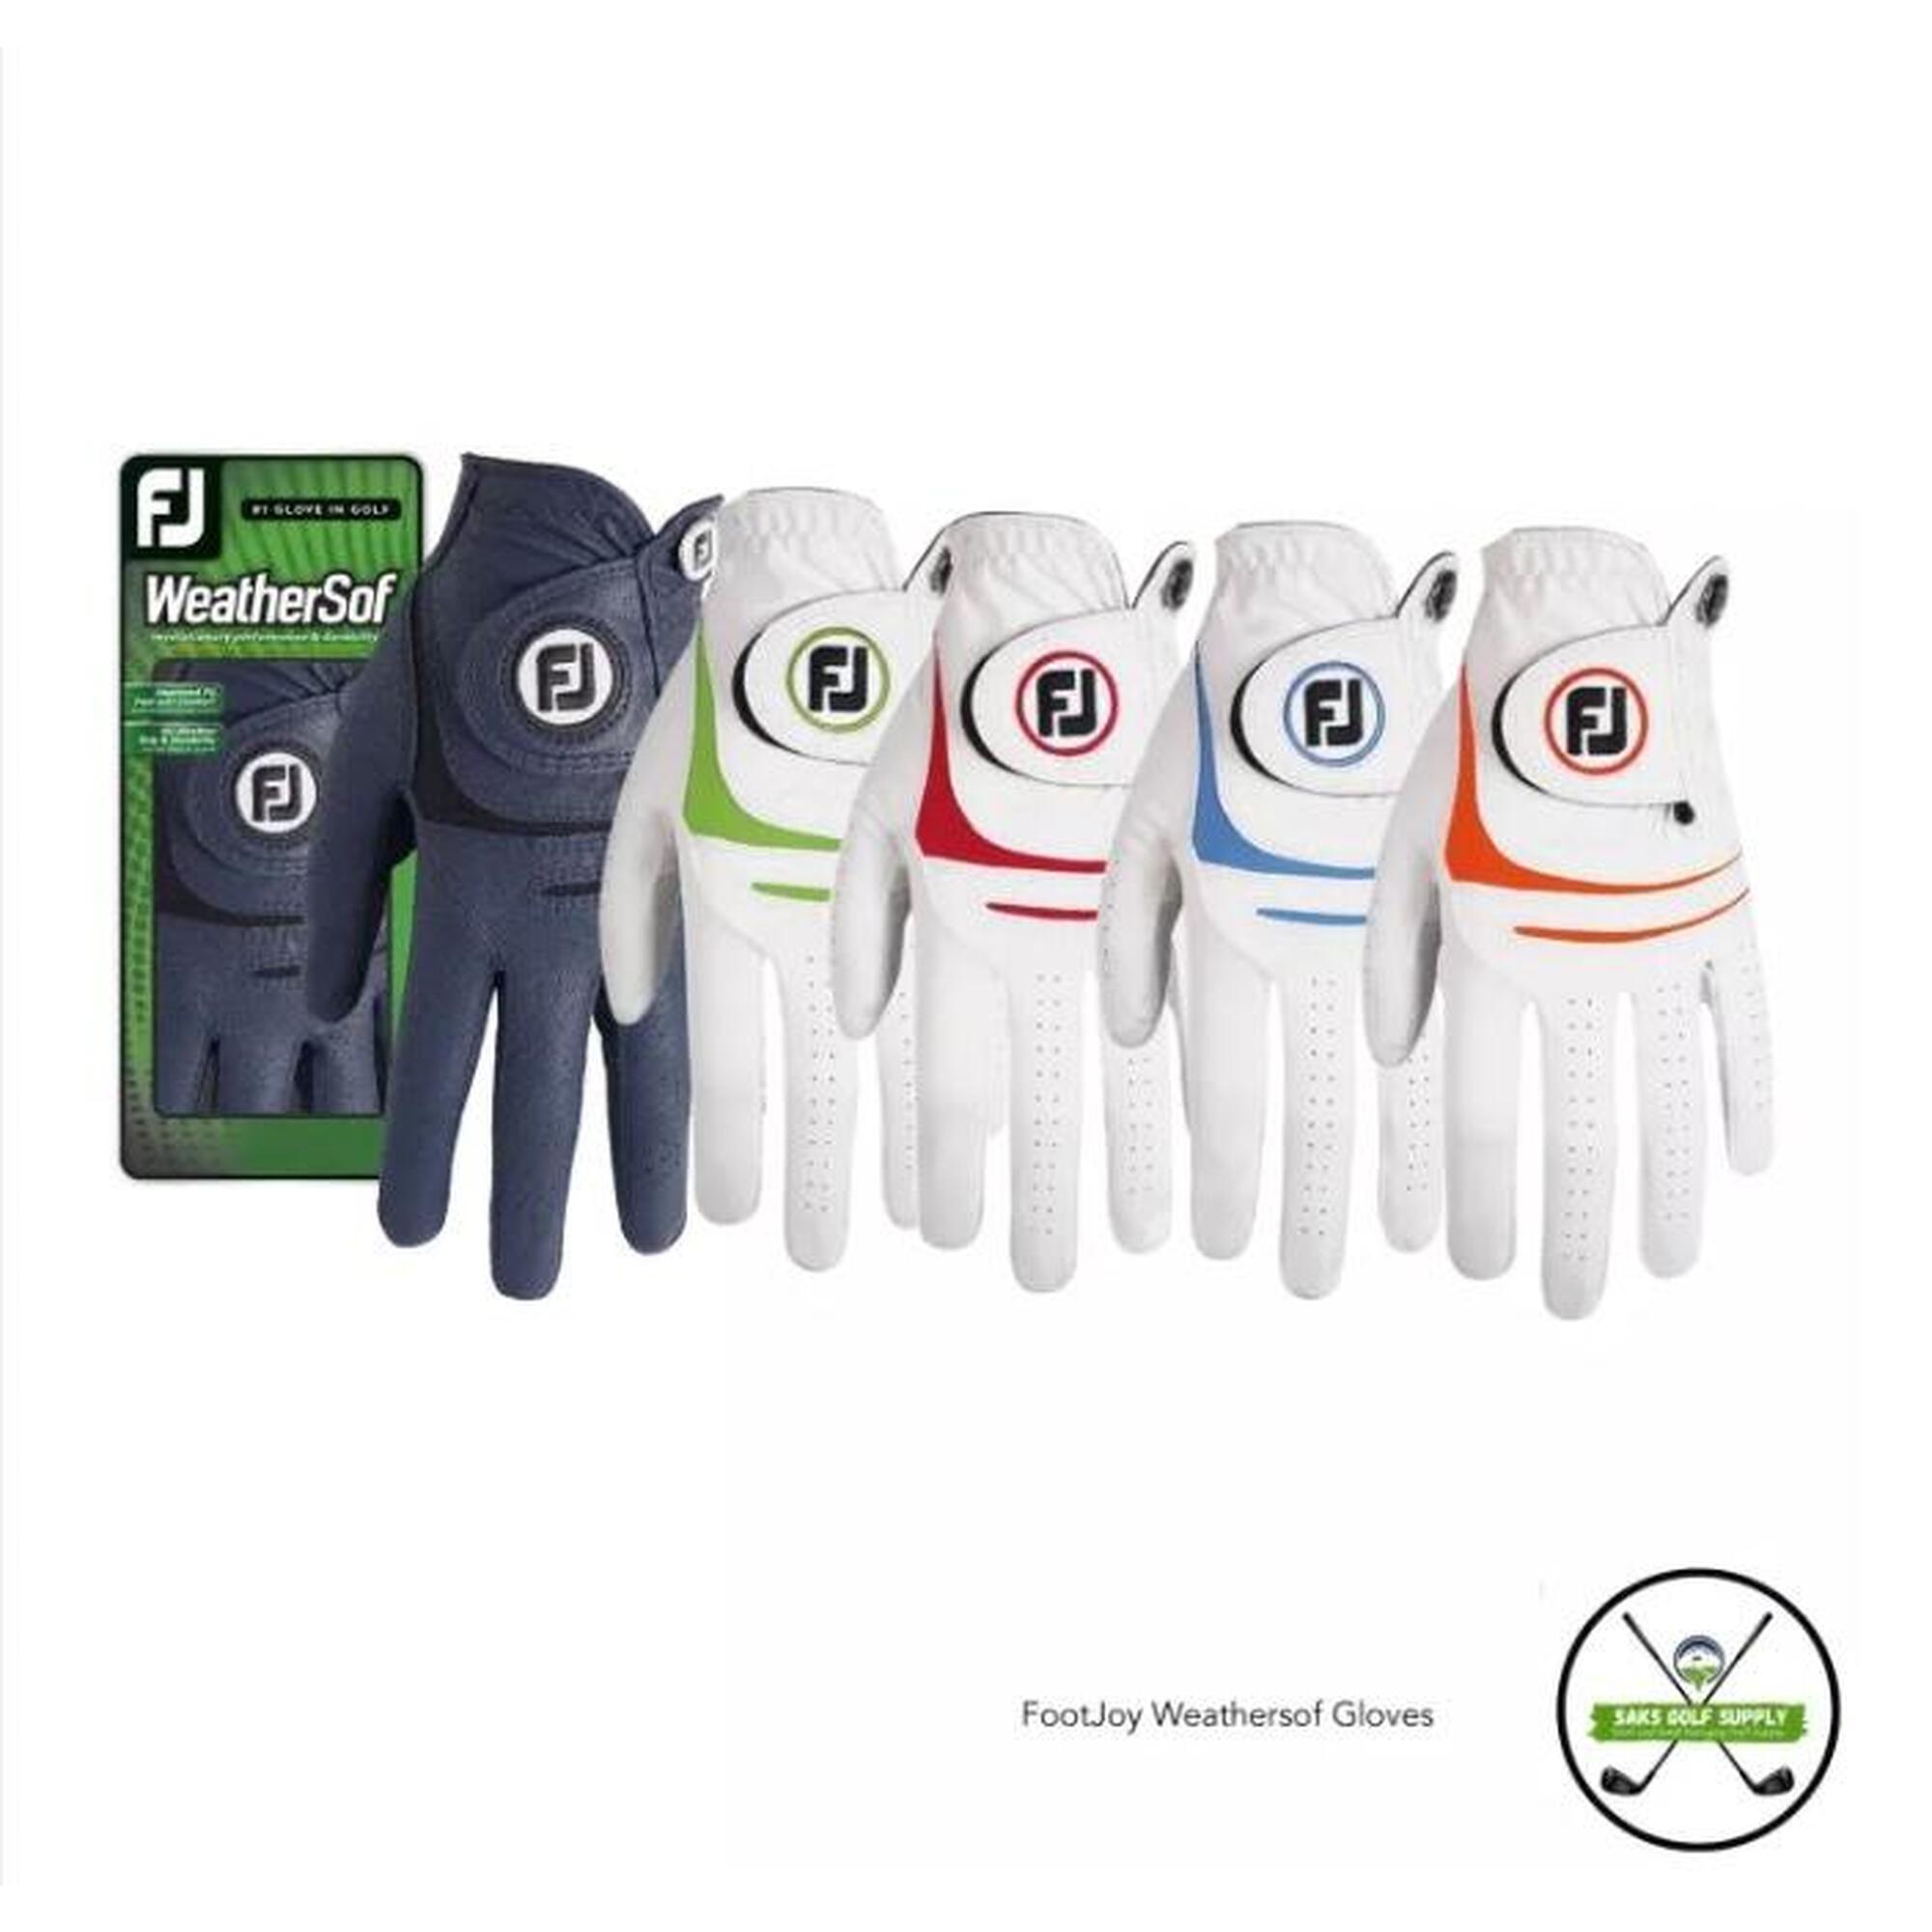 MEN'S WEATHERSOF LEATHER GOLF GLOVES (LEFT HAND)- WHITE/GREEN